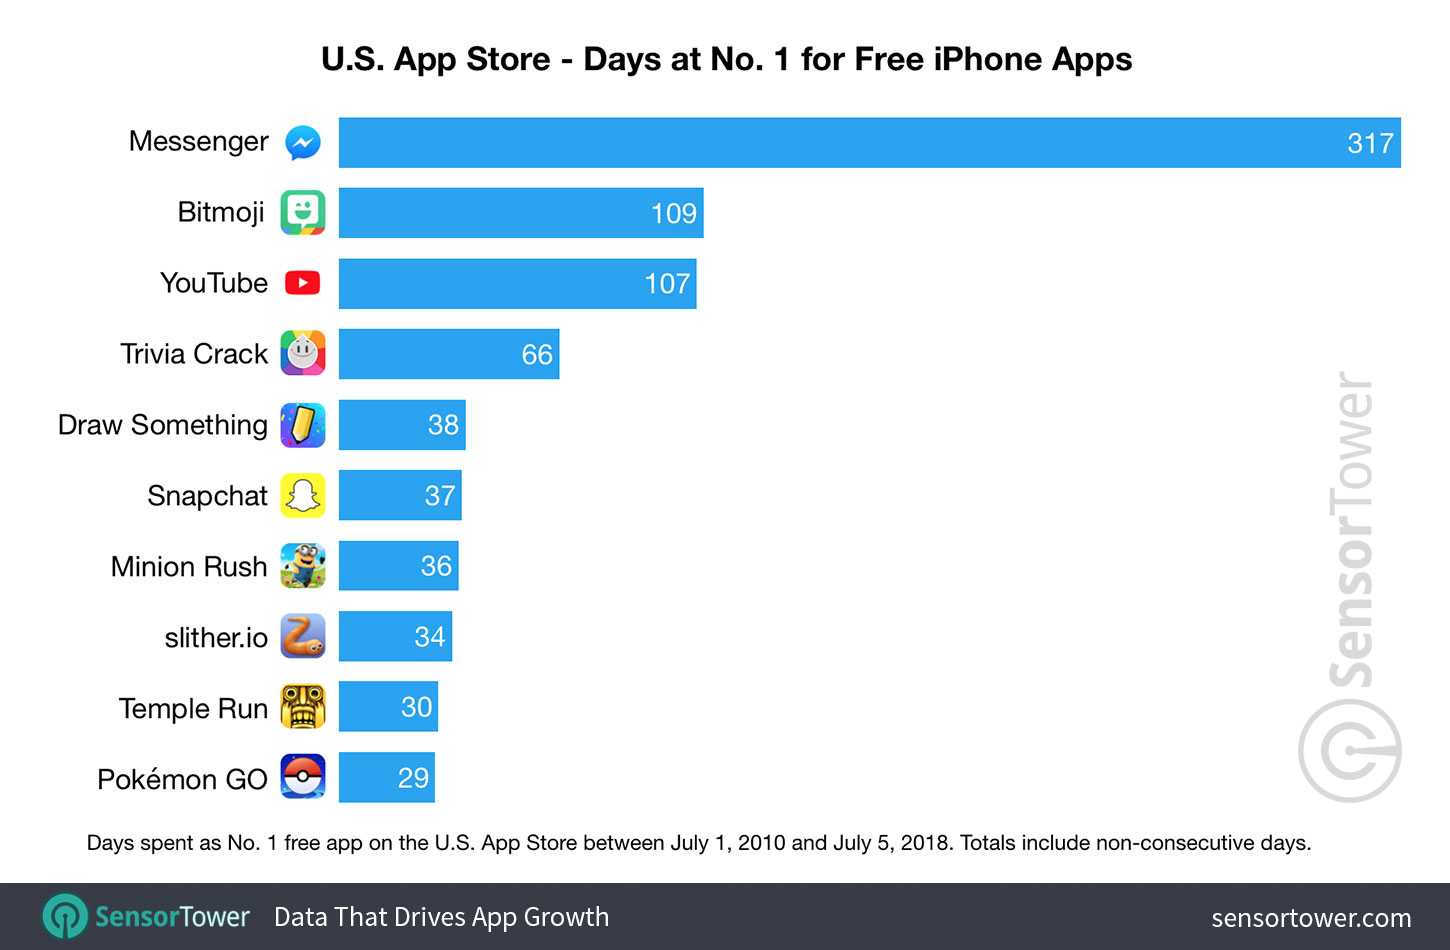 Chart showing a ranking of apps by number of days spent as No. 1 free iPhone app on the U.S. App Store